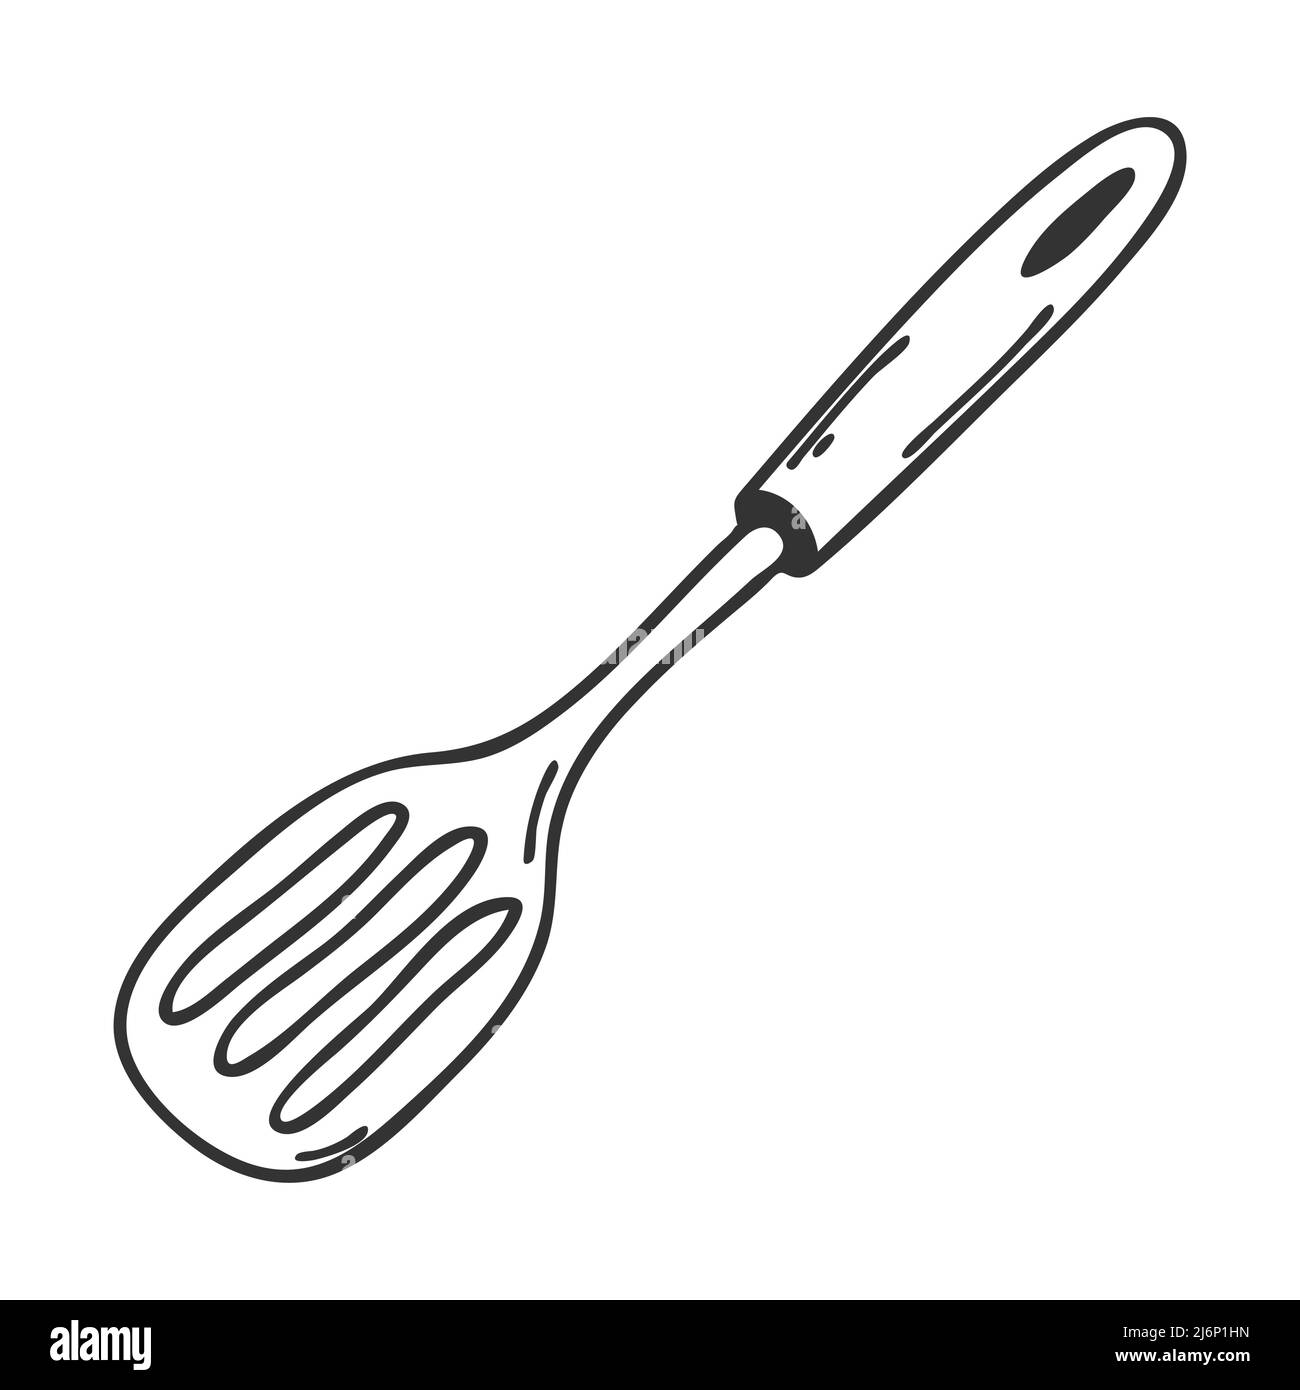 Culinary scoop. Tableware. Kitchen accessories, cooking utensils. Design element for menu design, recipes, and food packaging. Hand drawn and isolated Stock Vector